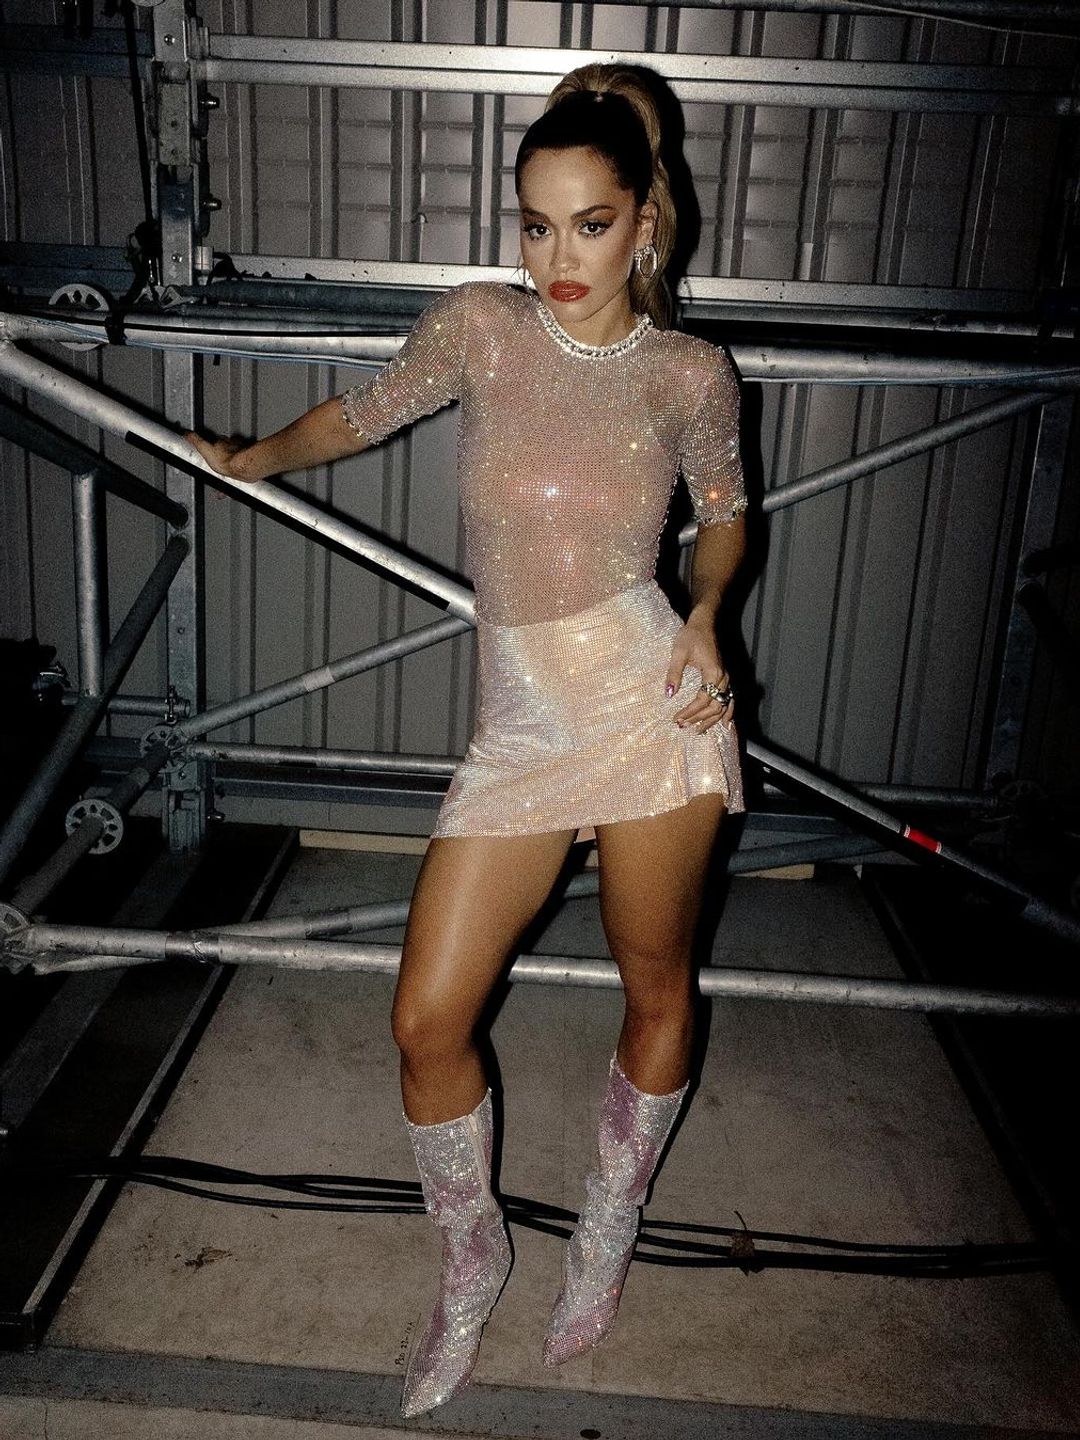 Mesh crystal outfits have been trending since 2022